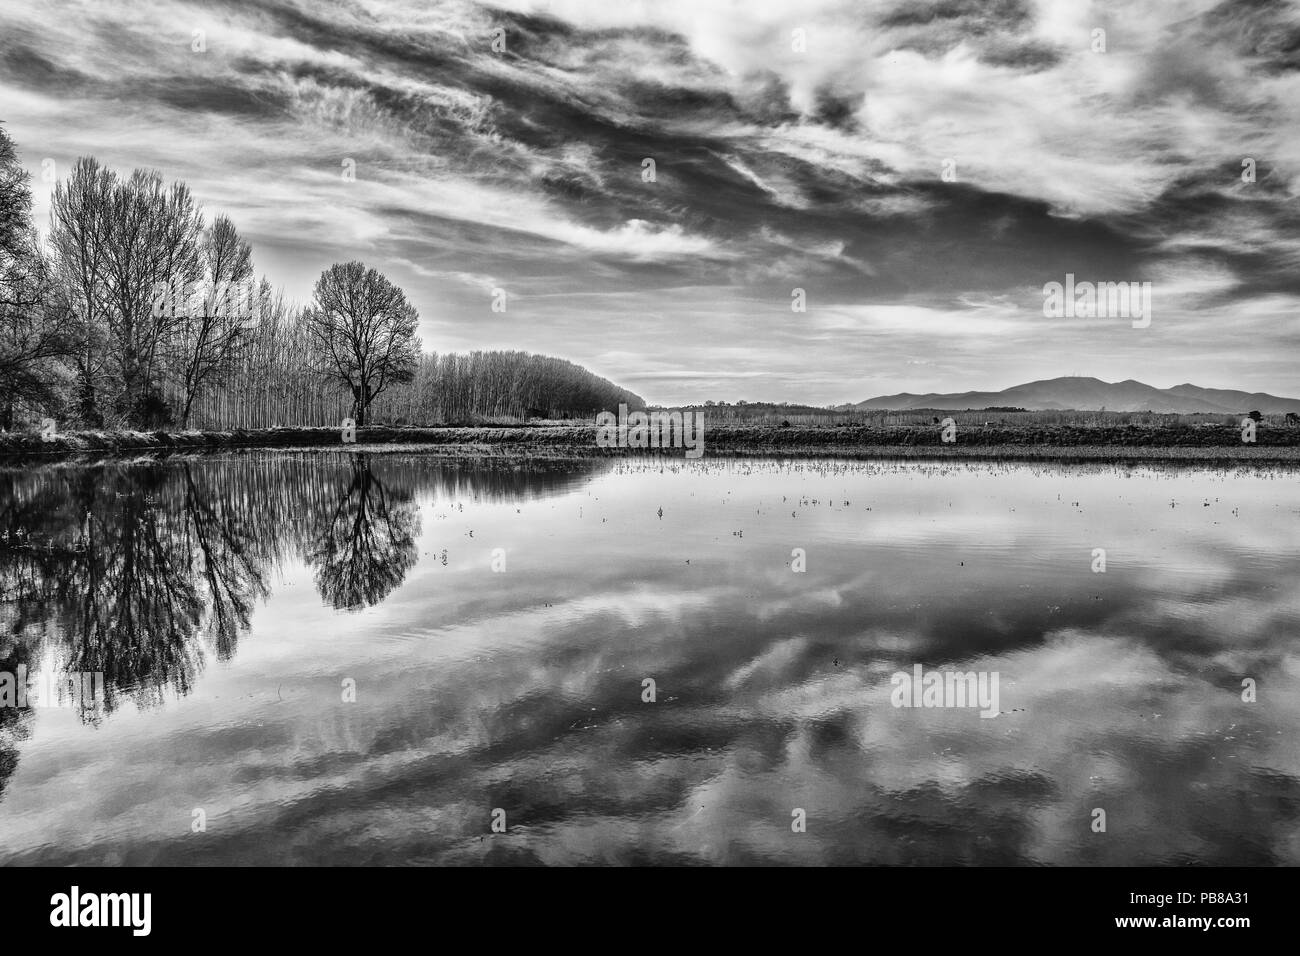 THE SKY IS MIRROR IN THE LAKE Stock Photo